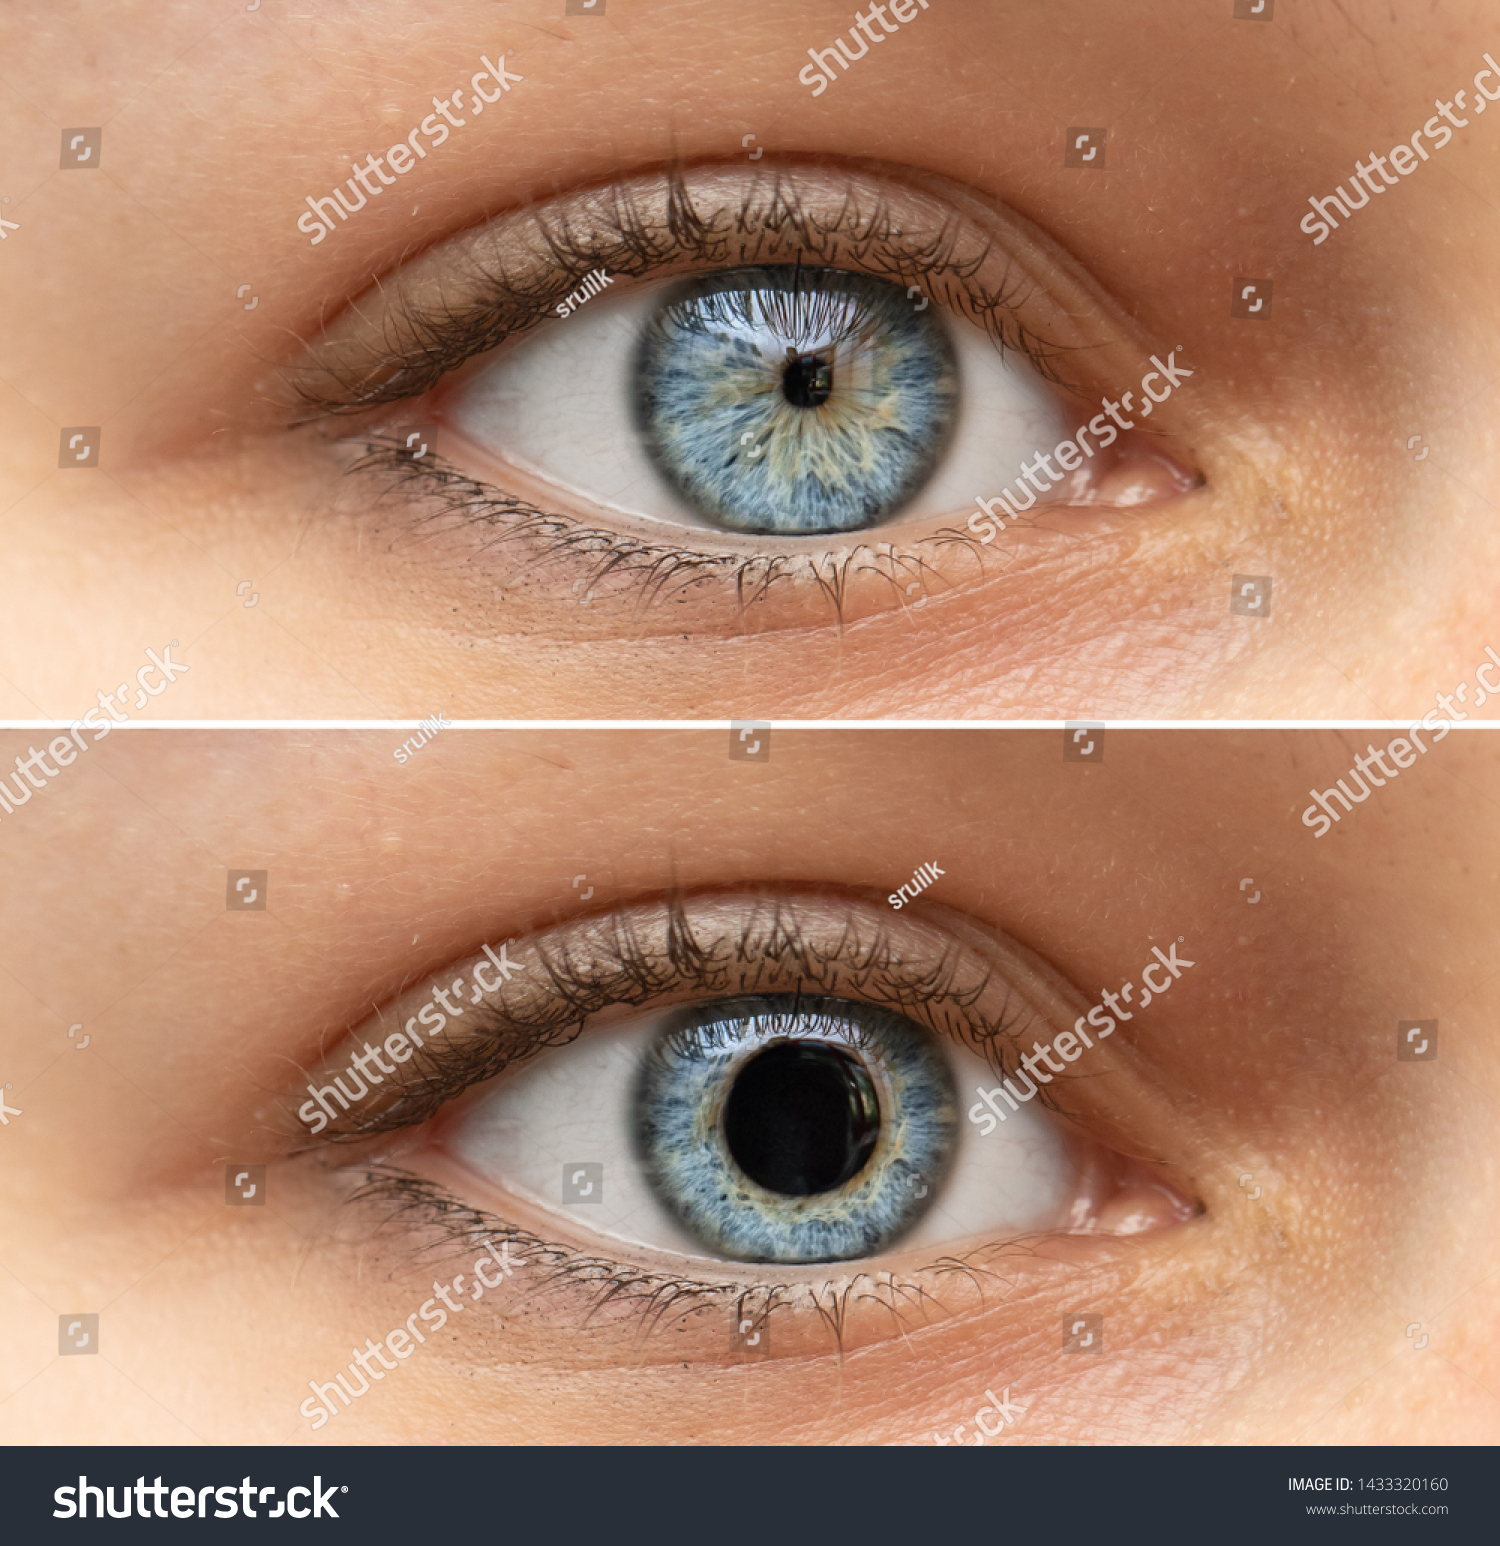 A closeup view on the blue eyes of a pretty young woman. Collage comparing the black pupil, one image shows an enlarged pupil and one shows a reduced pupil. Pupillary light reflex in humans. #1433320160